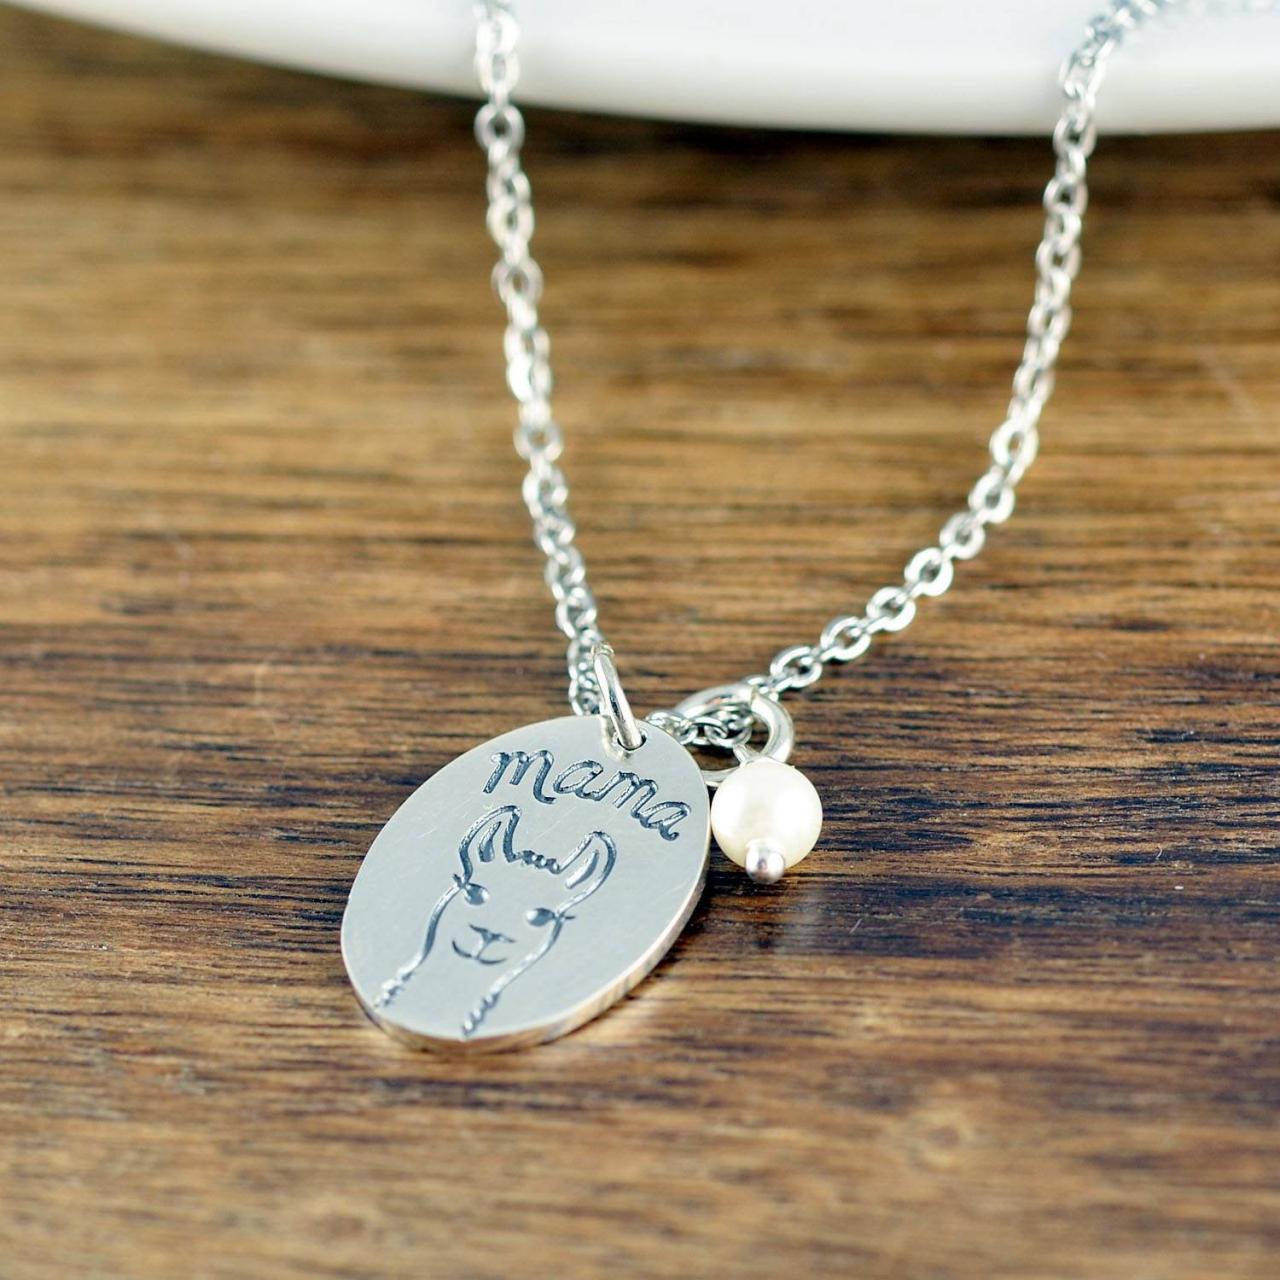 LLama Mama necklace, women's charm necklace, mom necklace, mom gift, gift for mom, Christmas gift for wife